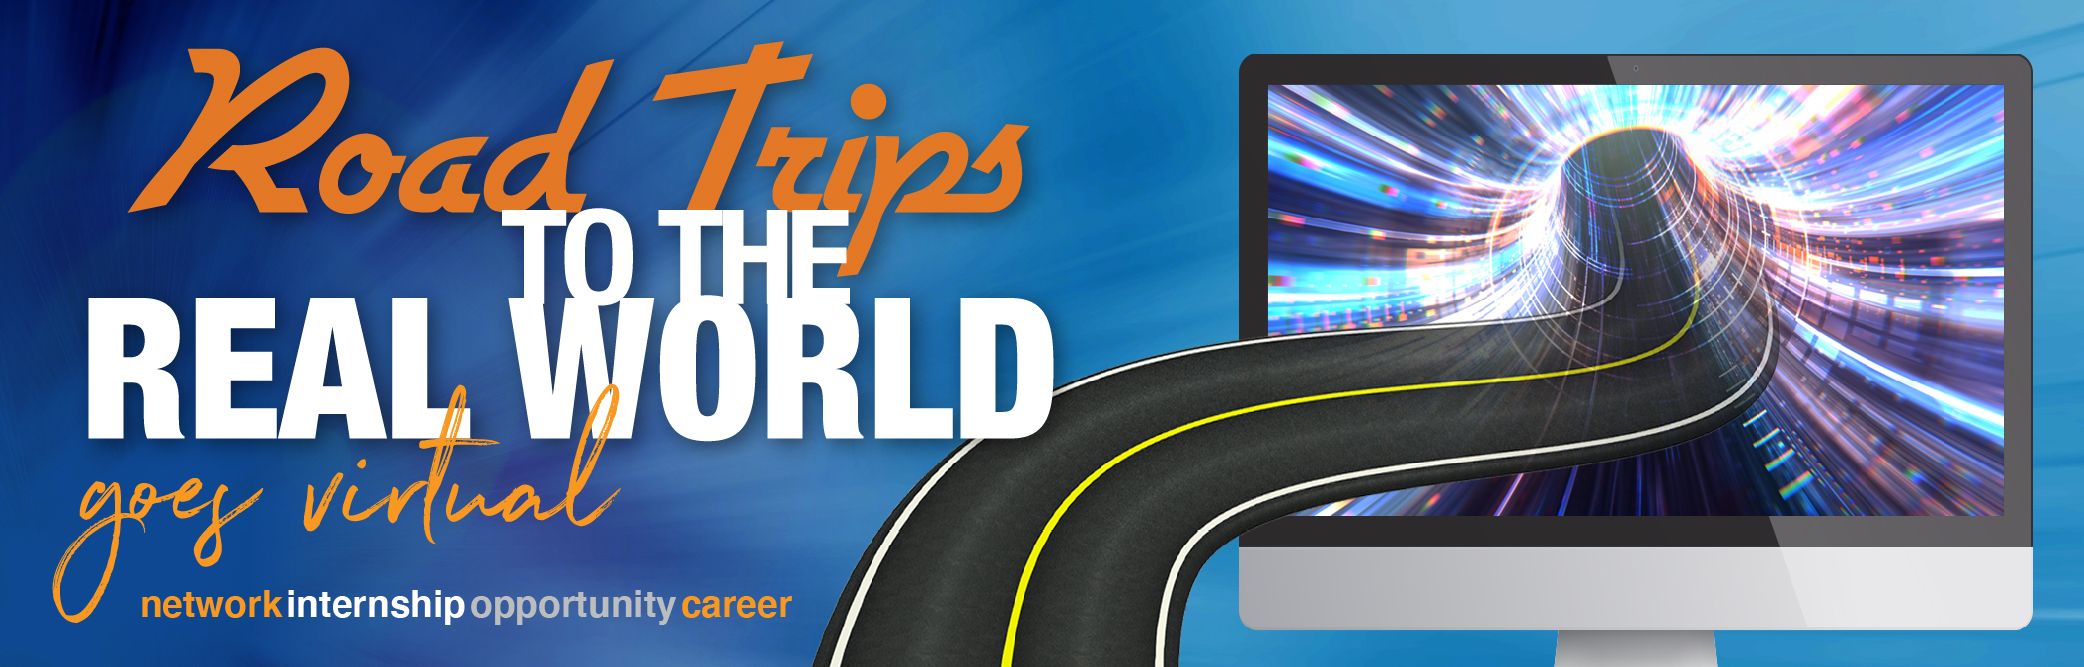 2021 Virtual Road Trips to the Real World January 12 28 Announce